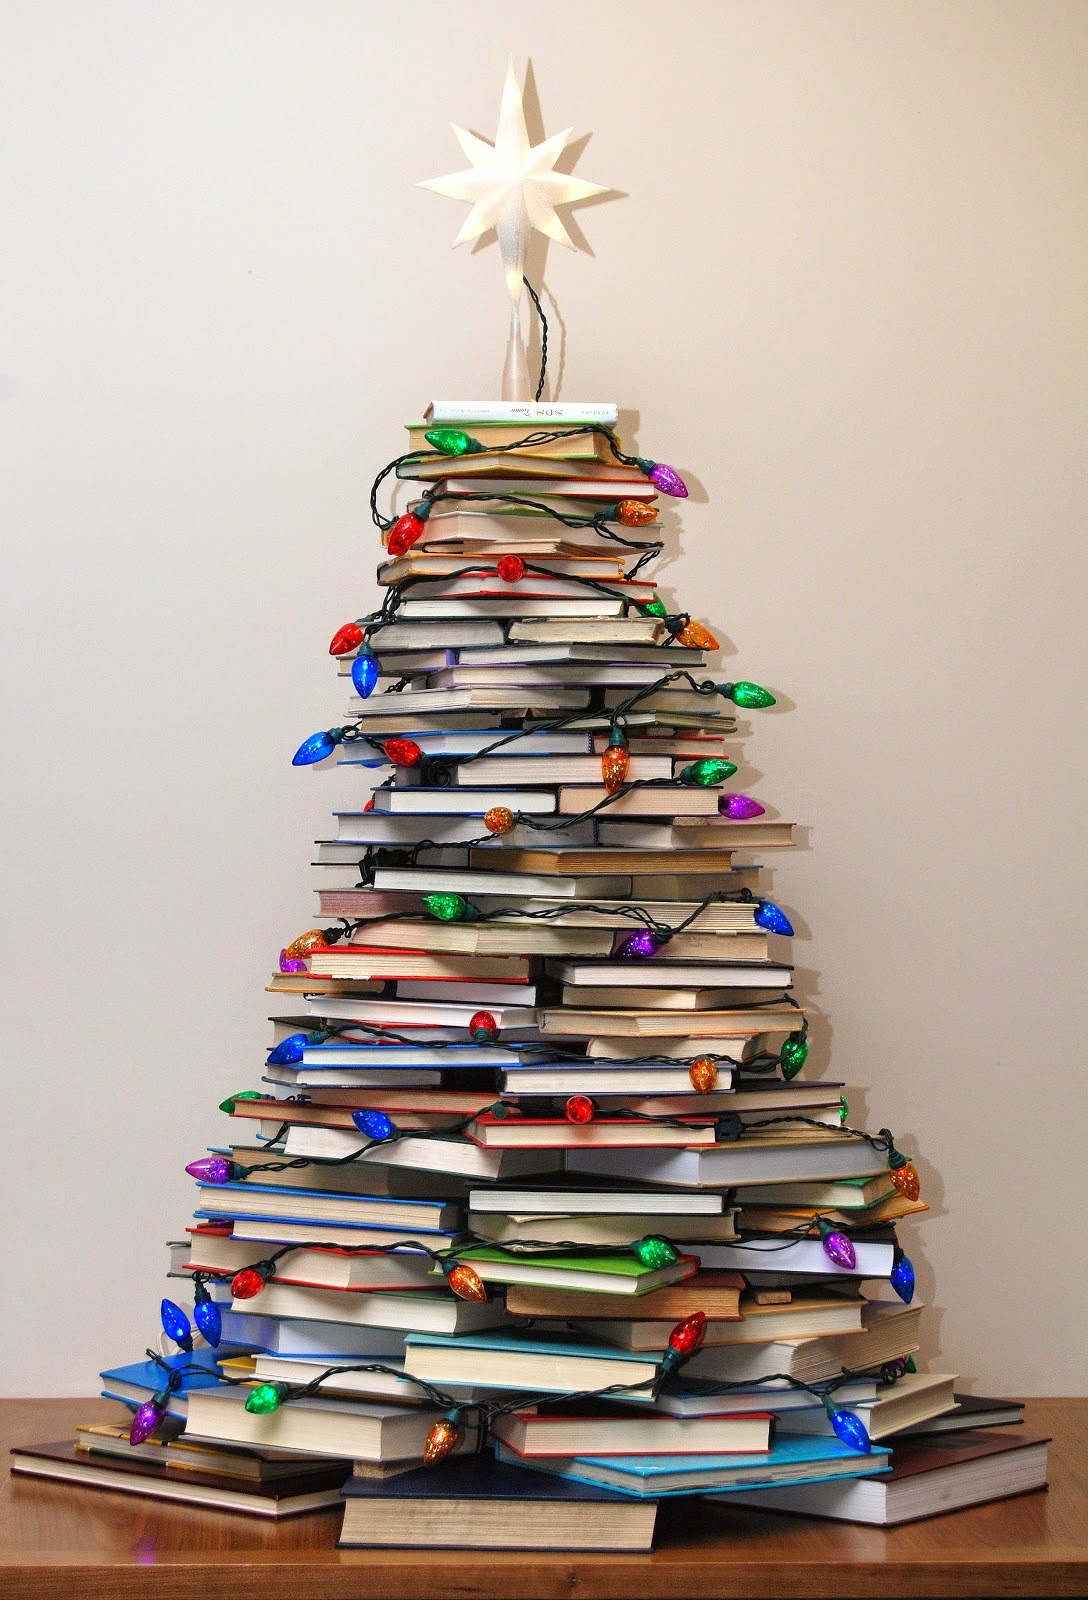 http://verymerryvintagestyle.blogspot.com/2012/12/how-to-make-christmas-tree-with-books.html